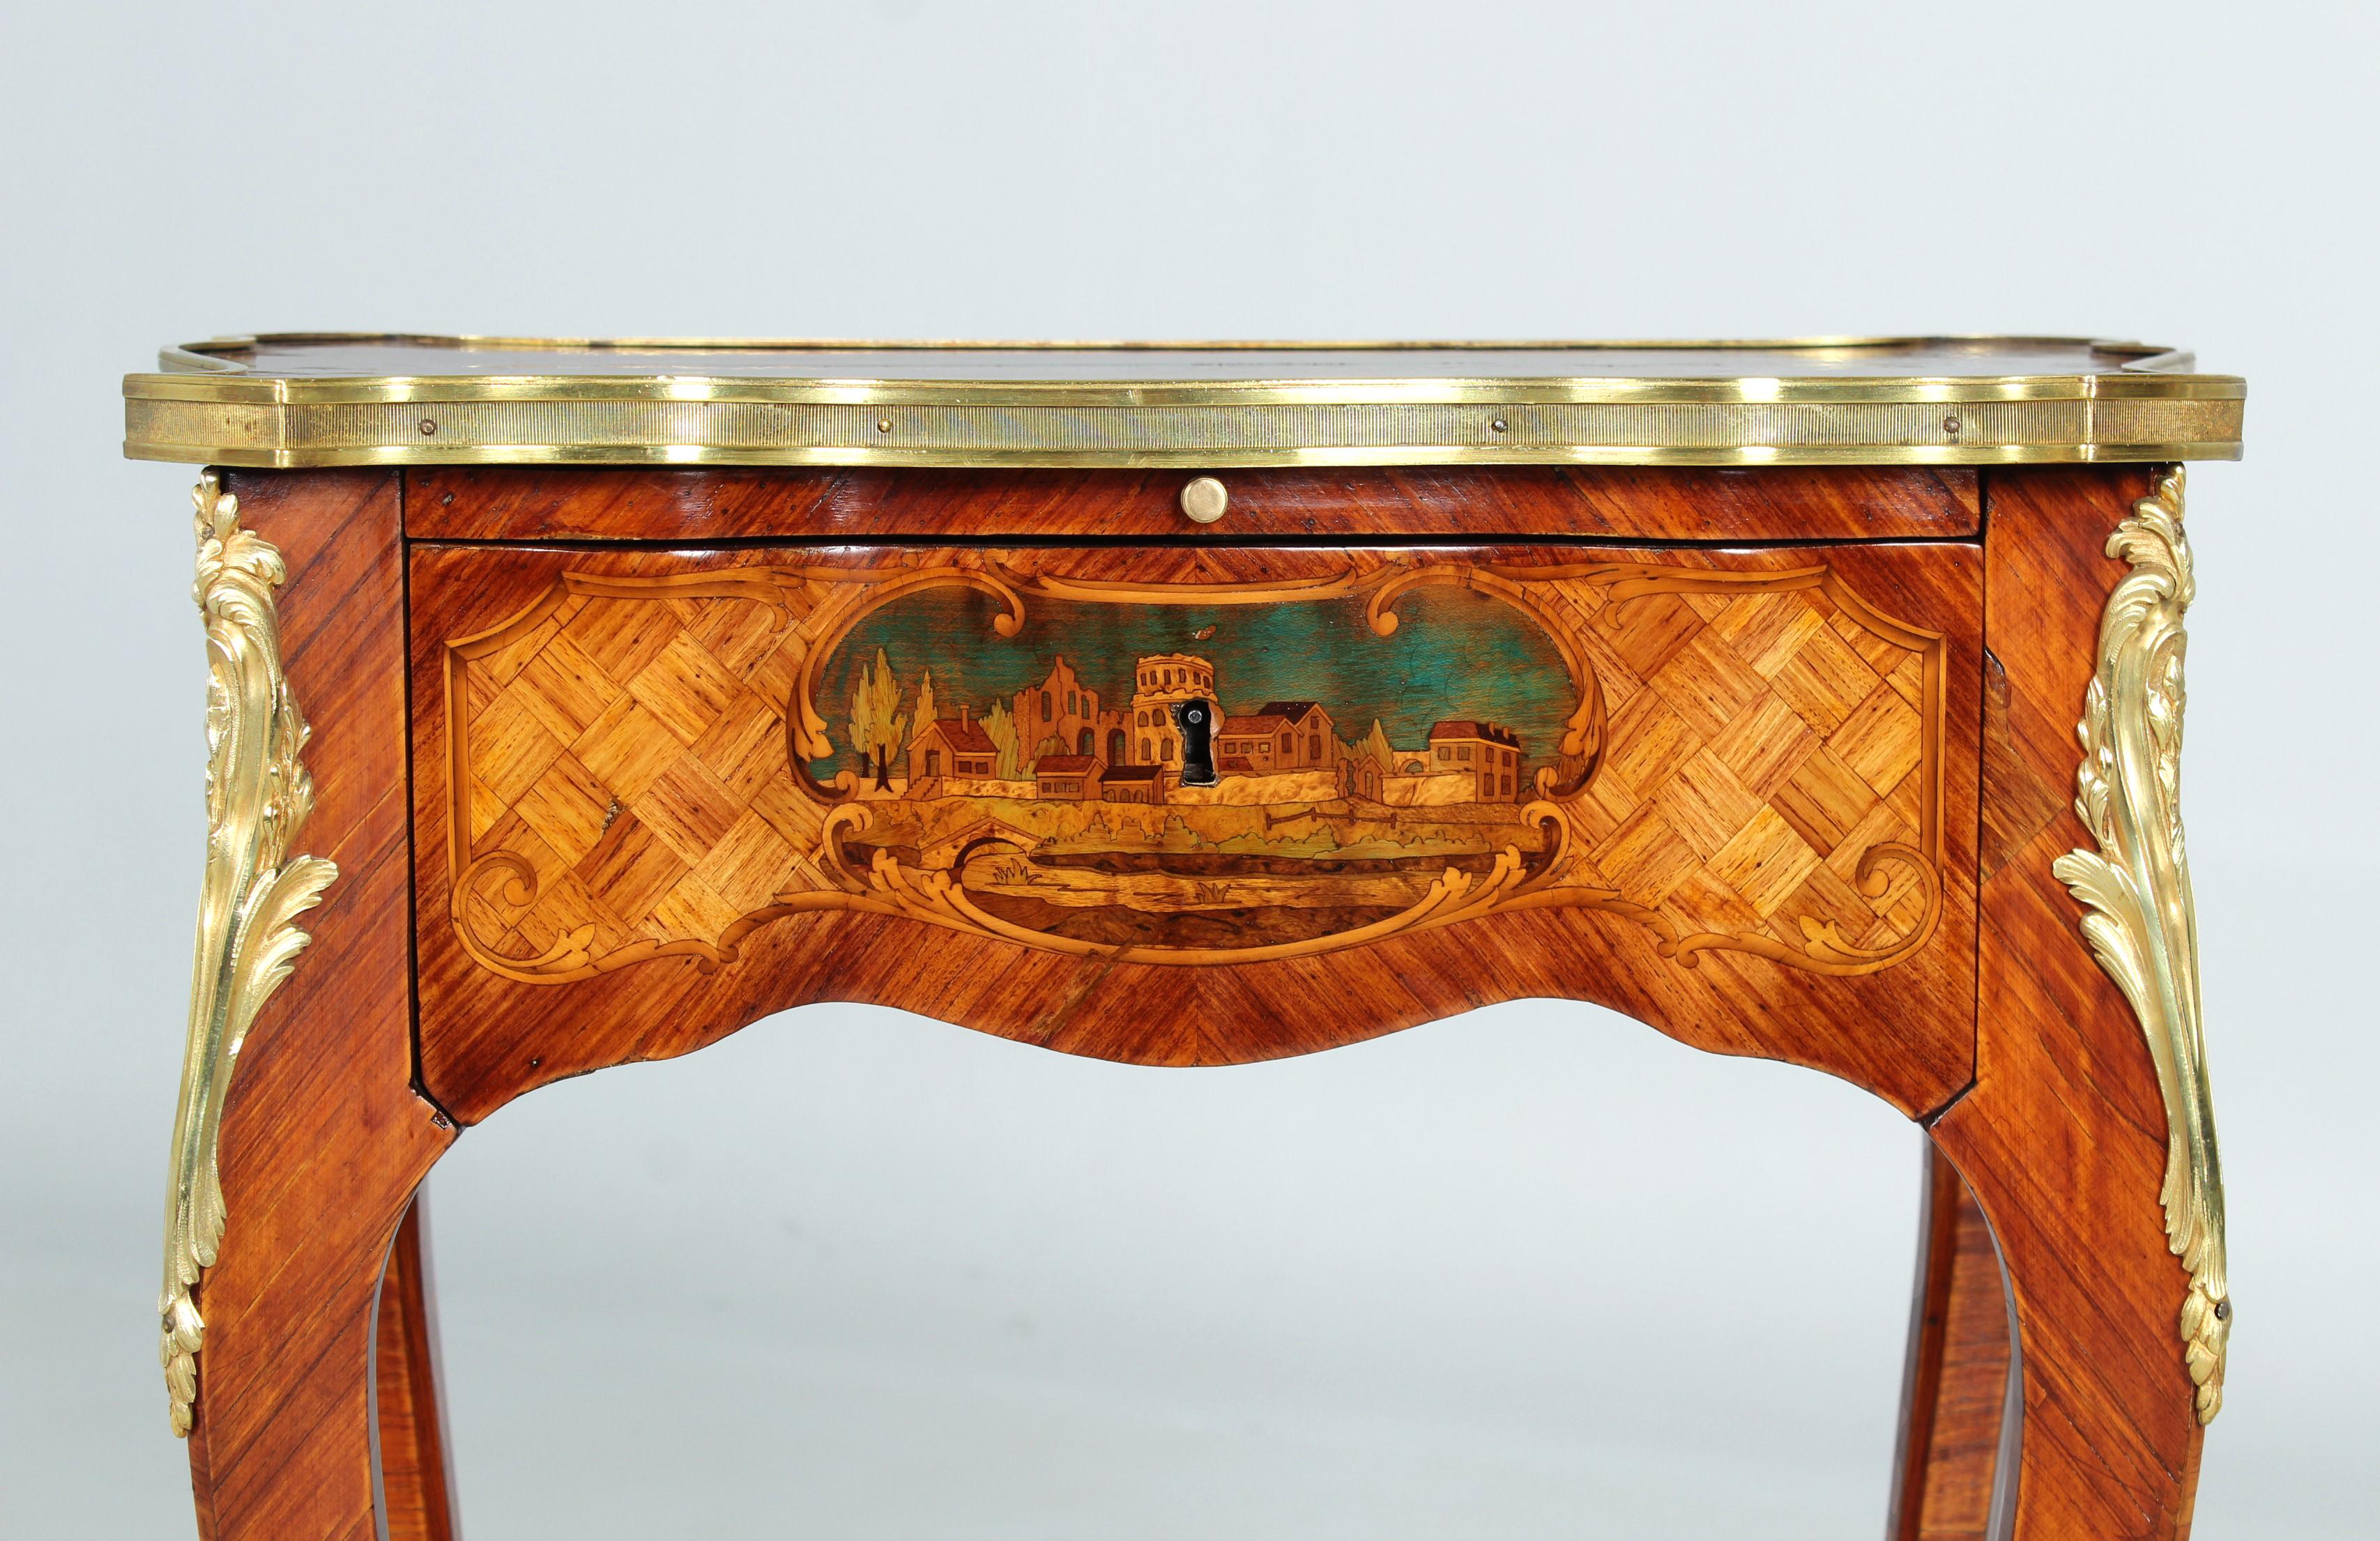 Finely marquetry ladies' desk, attributed to Alfred-Emmanuel-Louis Beurdeley

Paris
Rosewood and others
circa 1880

Dimensions: H x W x D: 74 x 55 x 36 cm

Description:
Rare and extremely high quality ladies' desk.

The curved legs stand in sabots